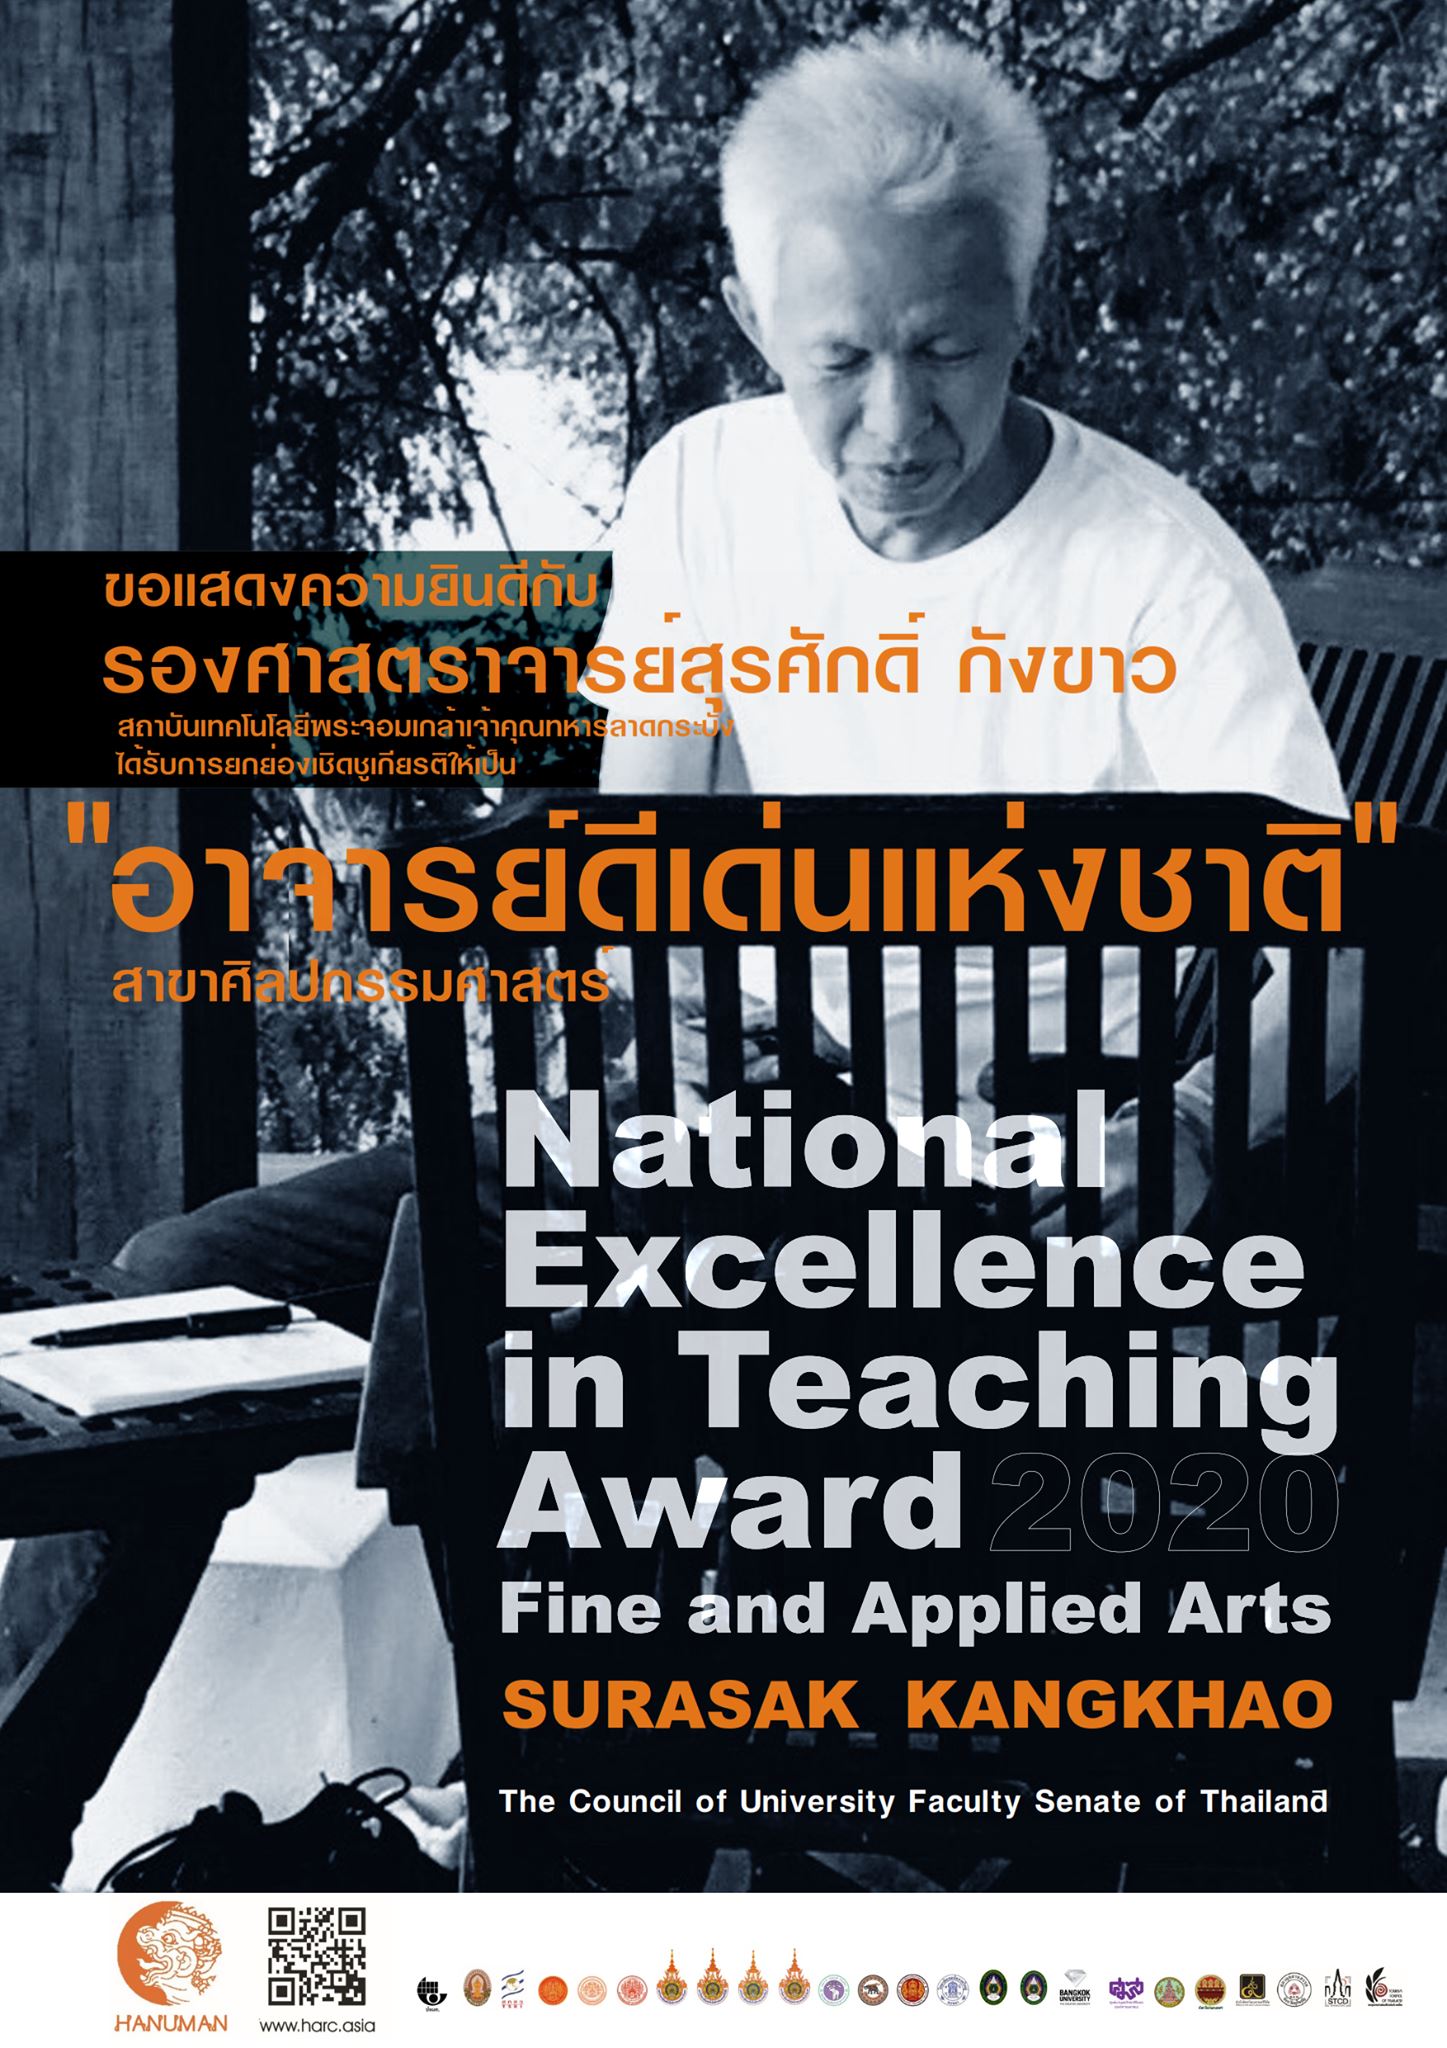 Surasak Kangkhao National Excellence in Teaching Award, Fine and Applied Arts